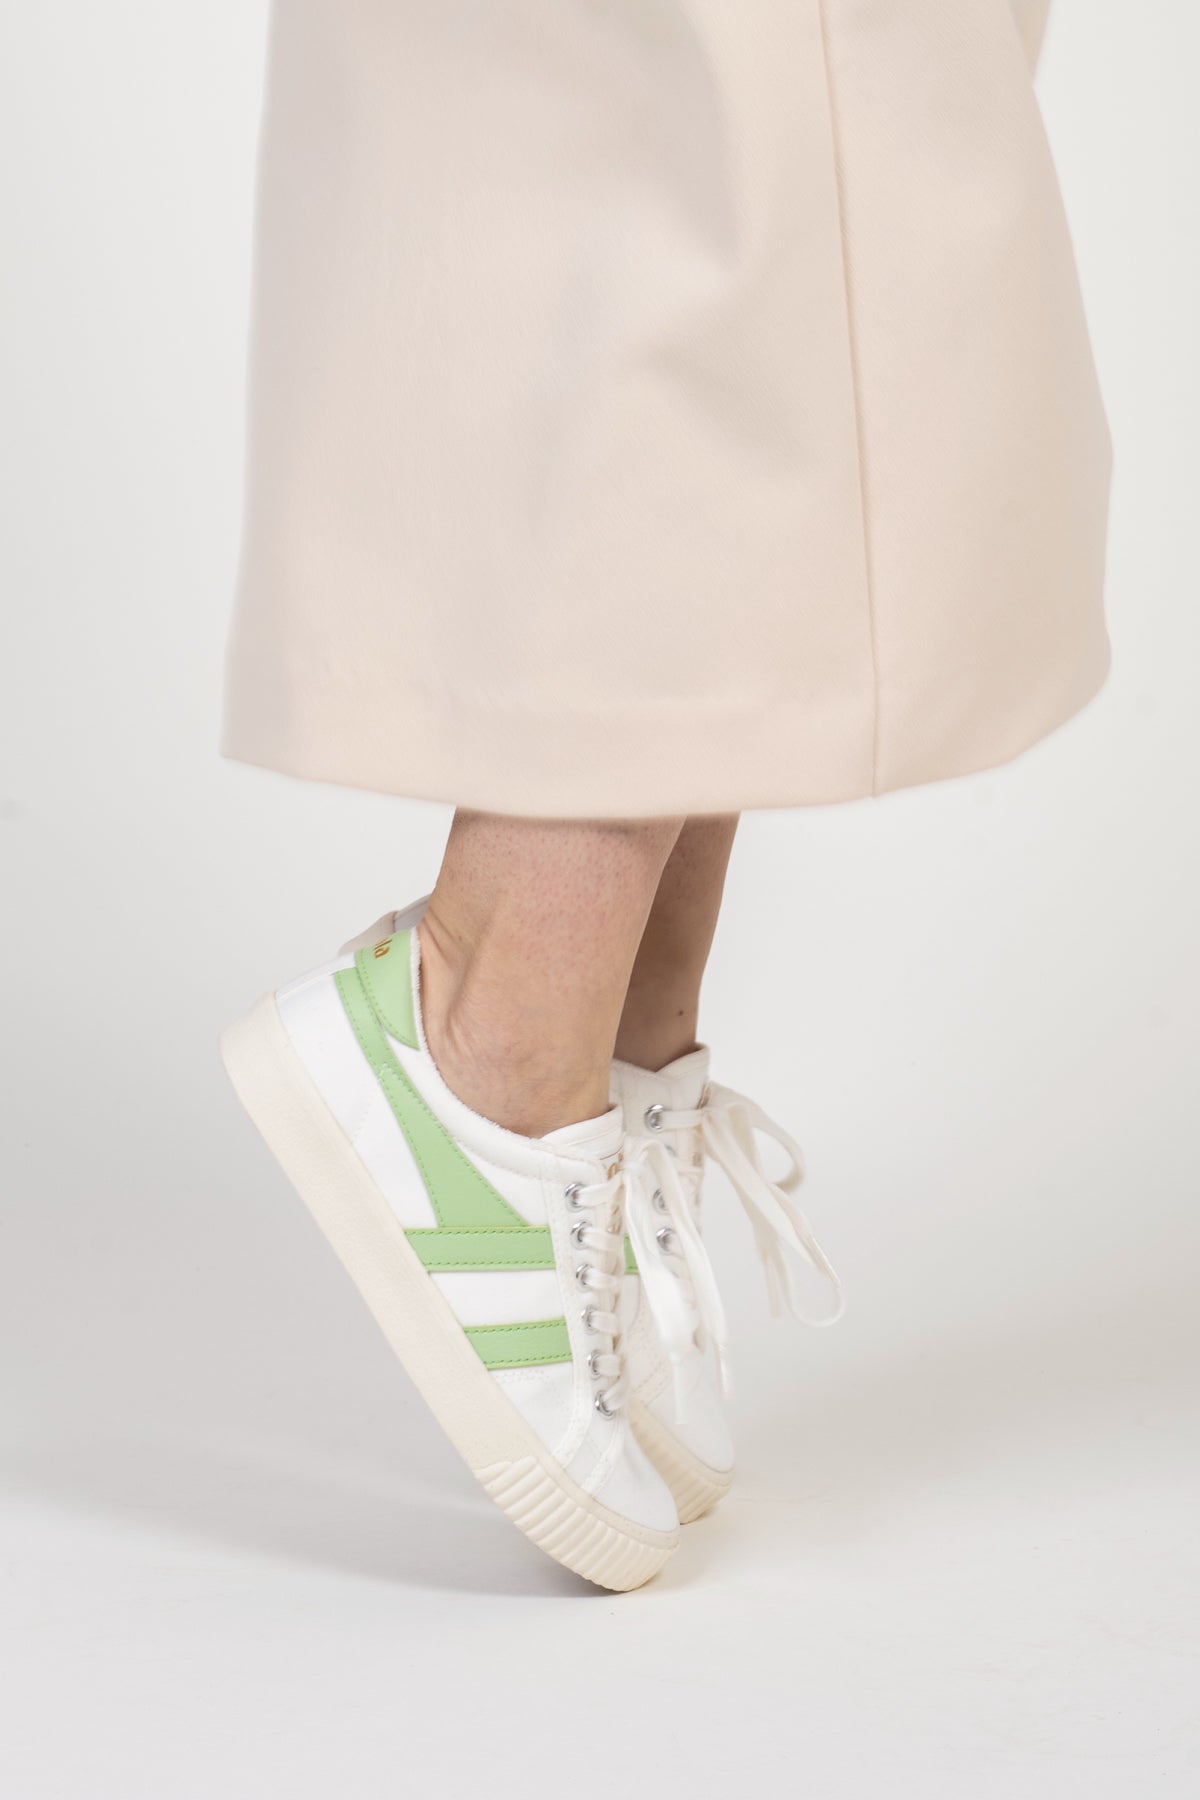 Tennis Mark Cox Sneakers Off White/Patina Green